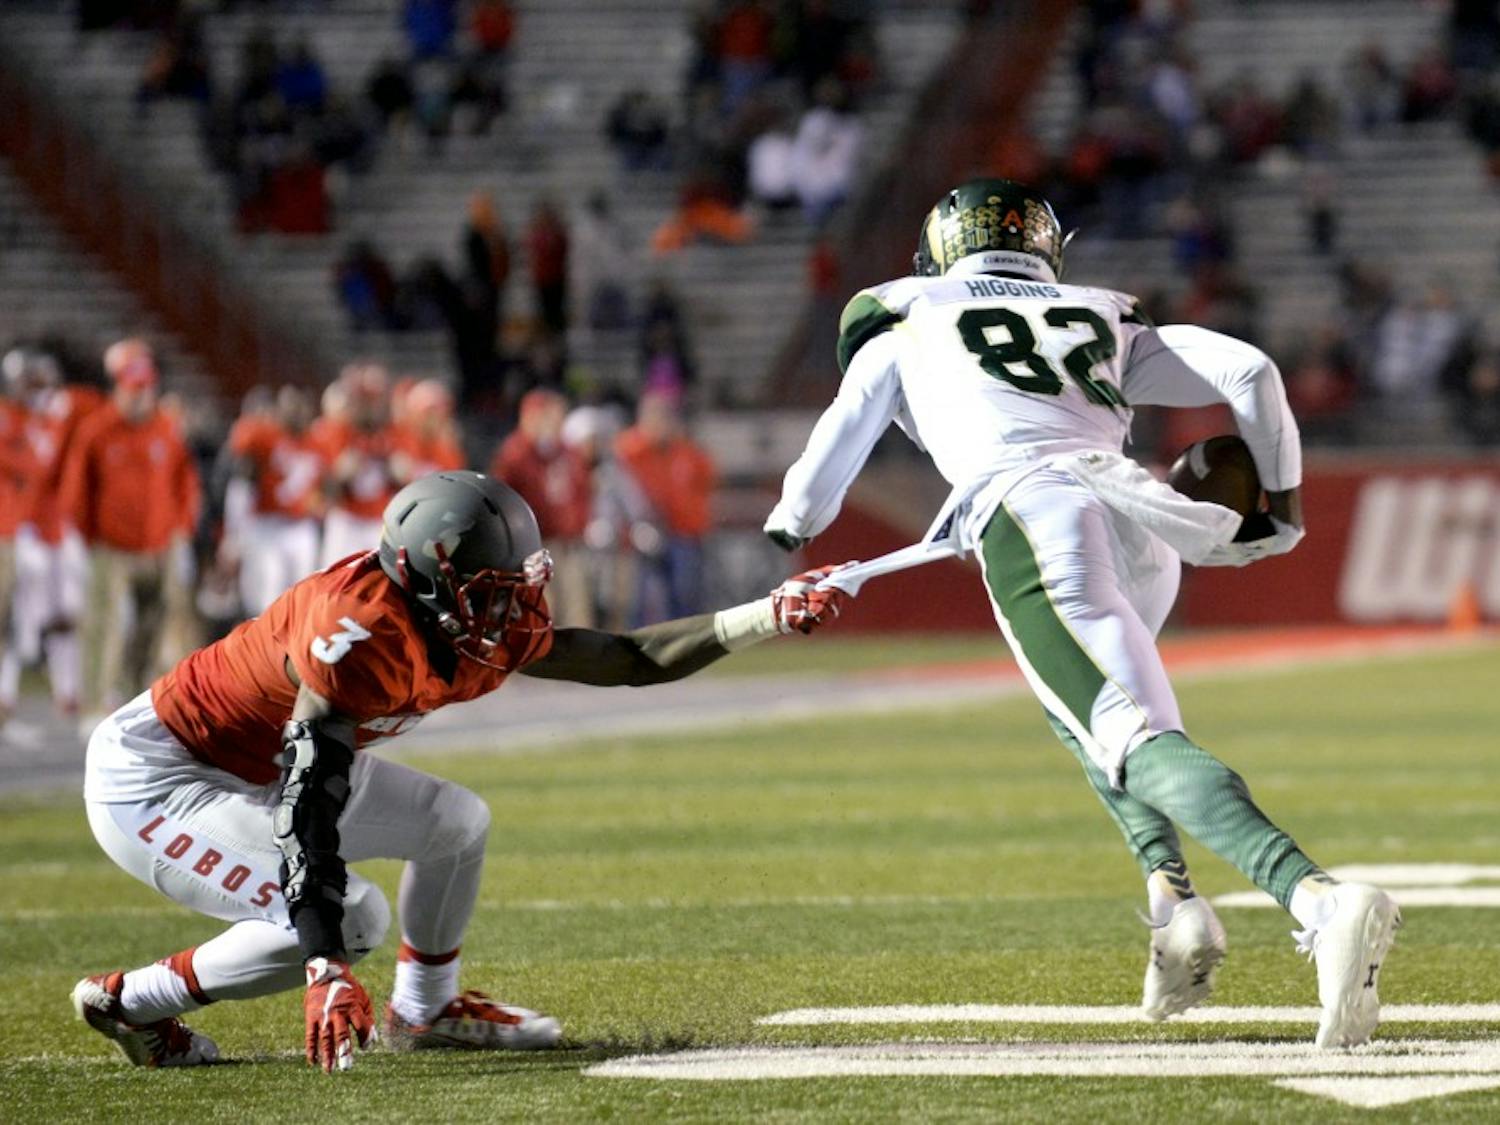 Senior cornerback Cranston Jones tries to bring down CSU's Rashard Higgins at University Stadium Saturday night. The Lobos lost to the Rams 28-21 and lost their chance to make it to the Mountain West Championships.&nbsp;